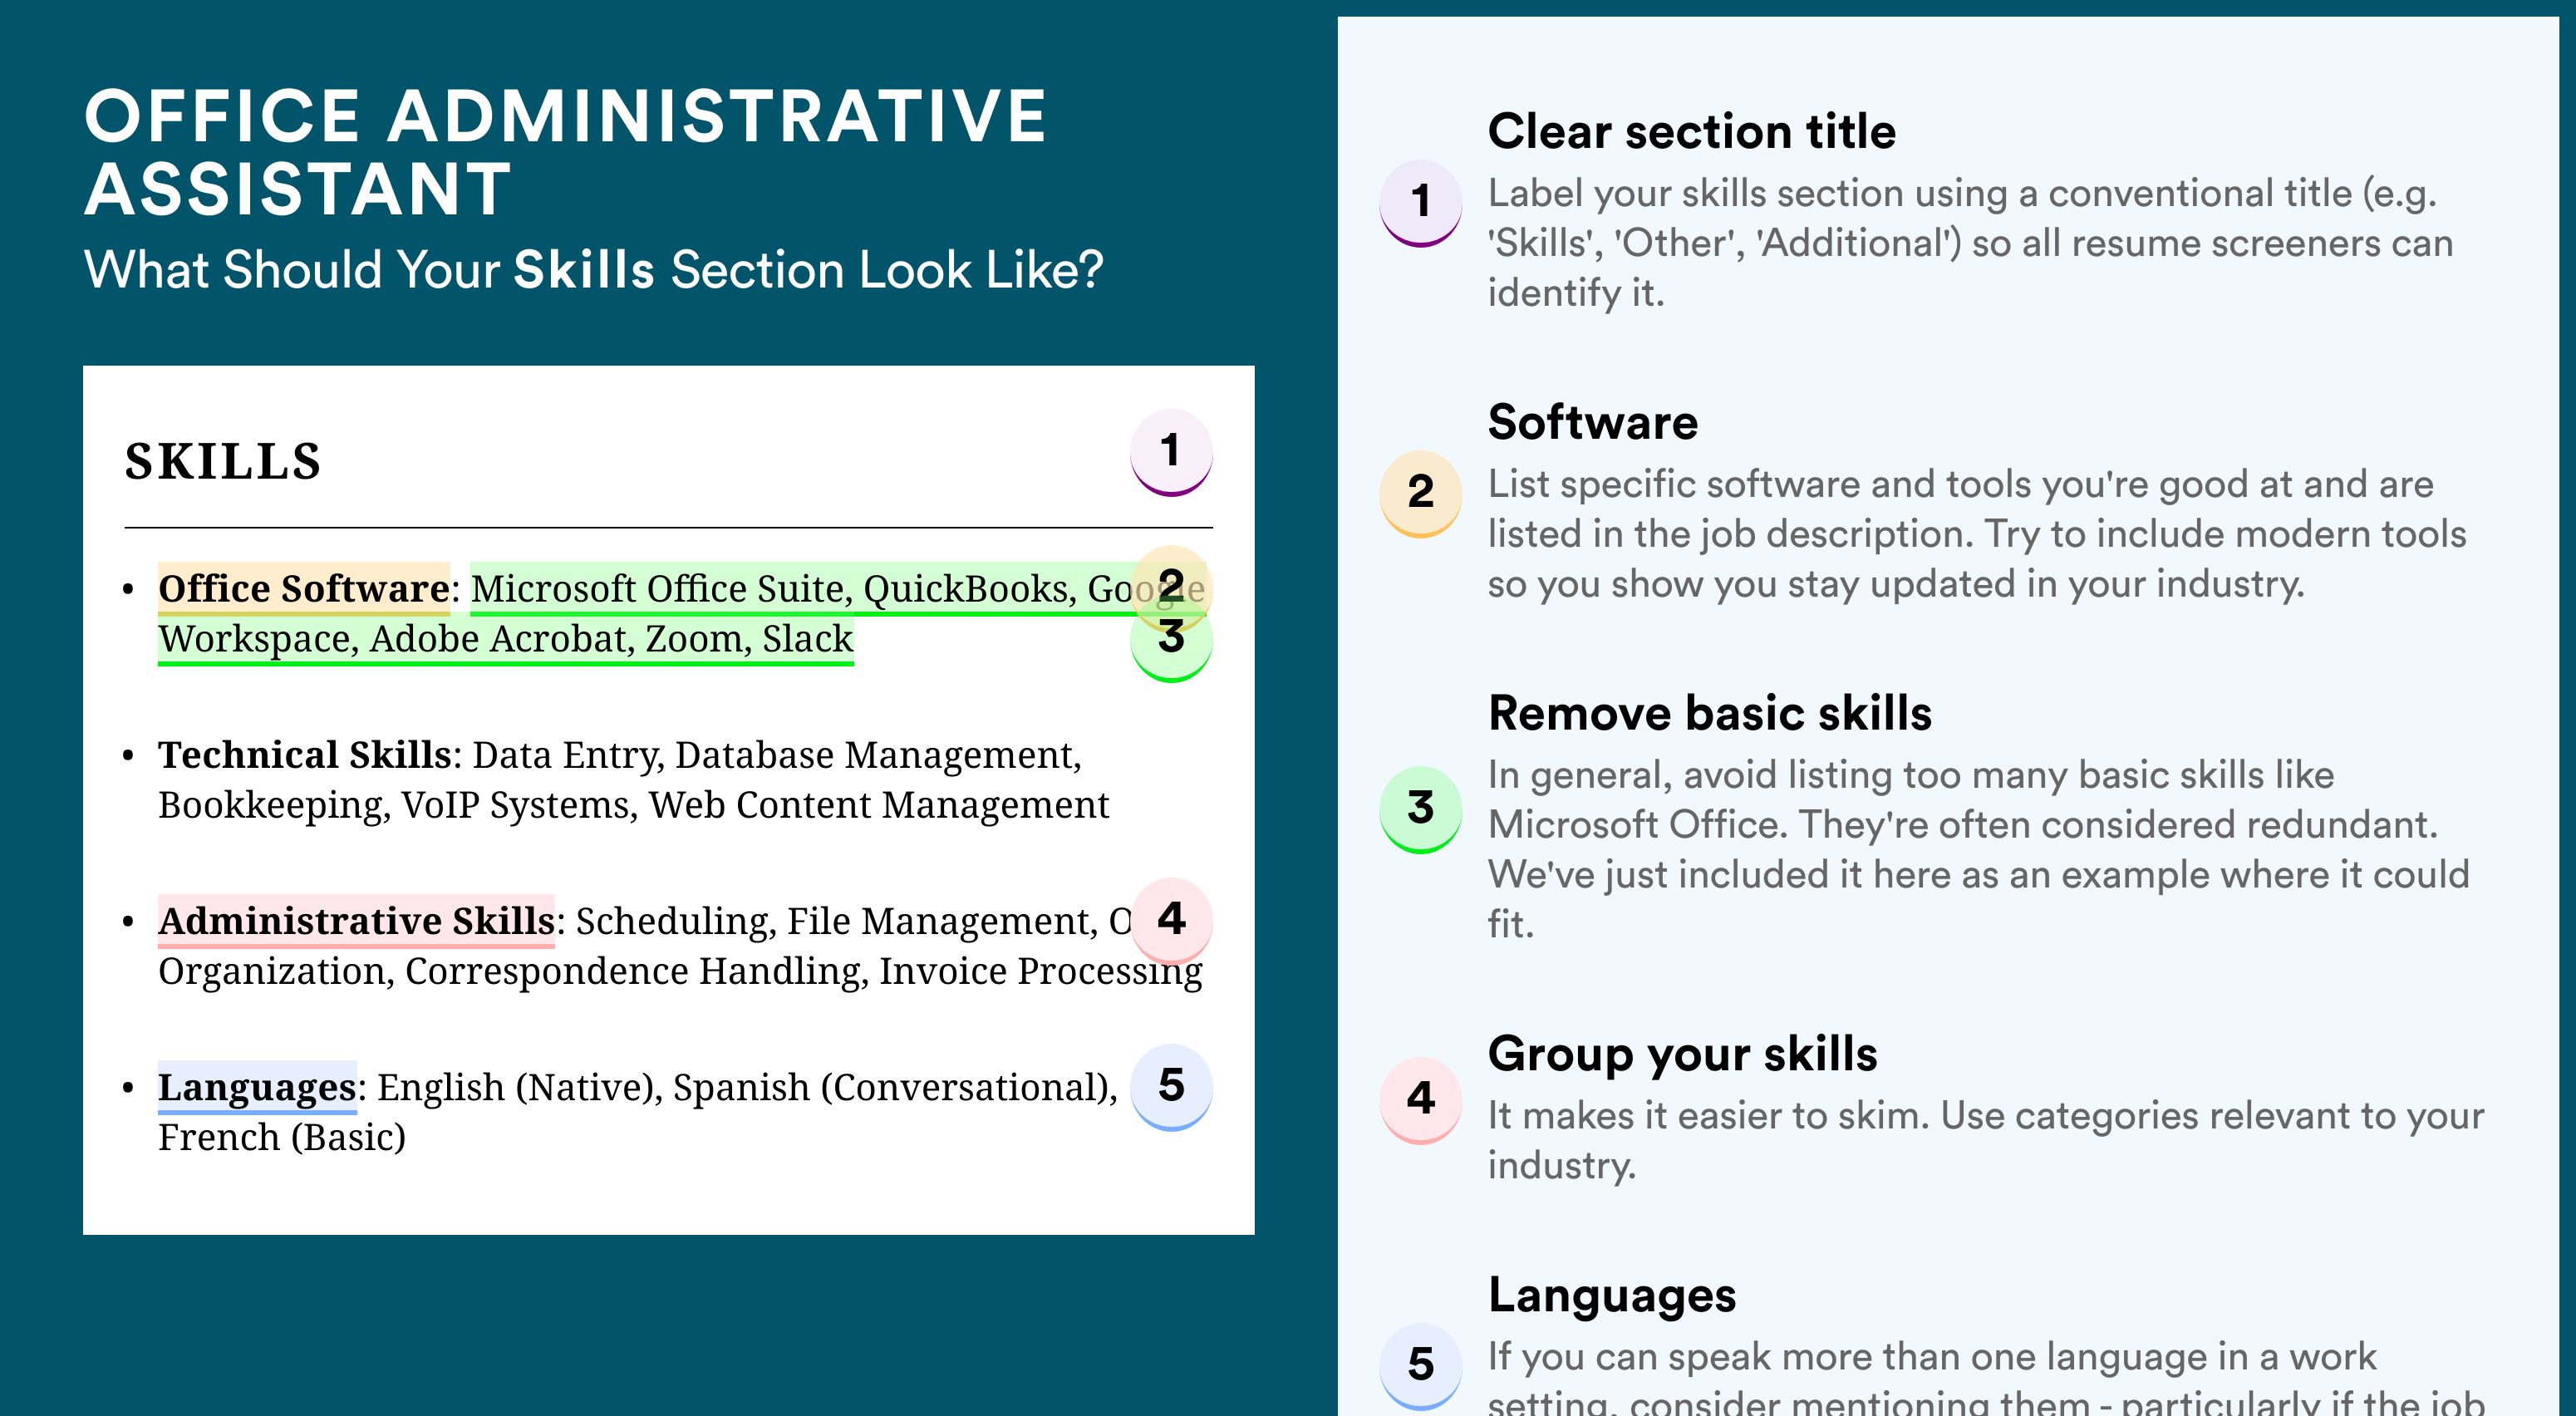 How To Write Your Skills Section - Office Administrative Assistant Roles